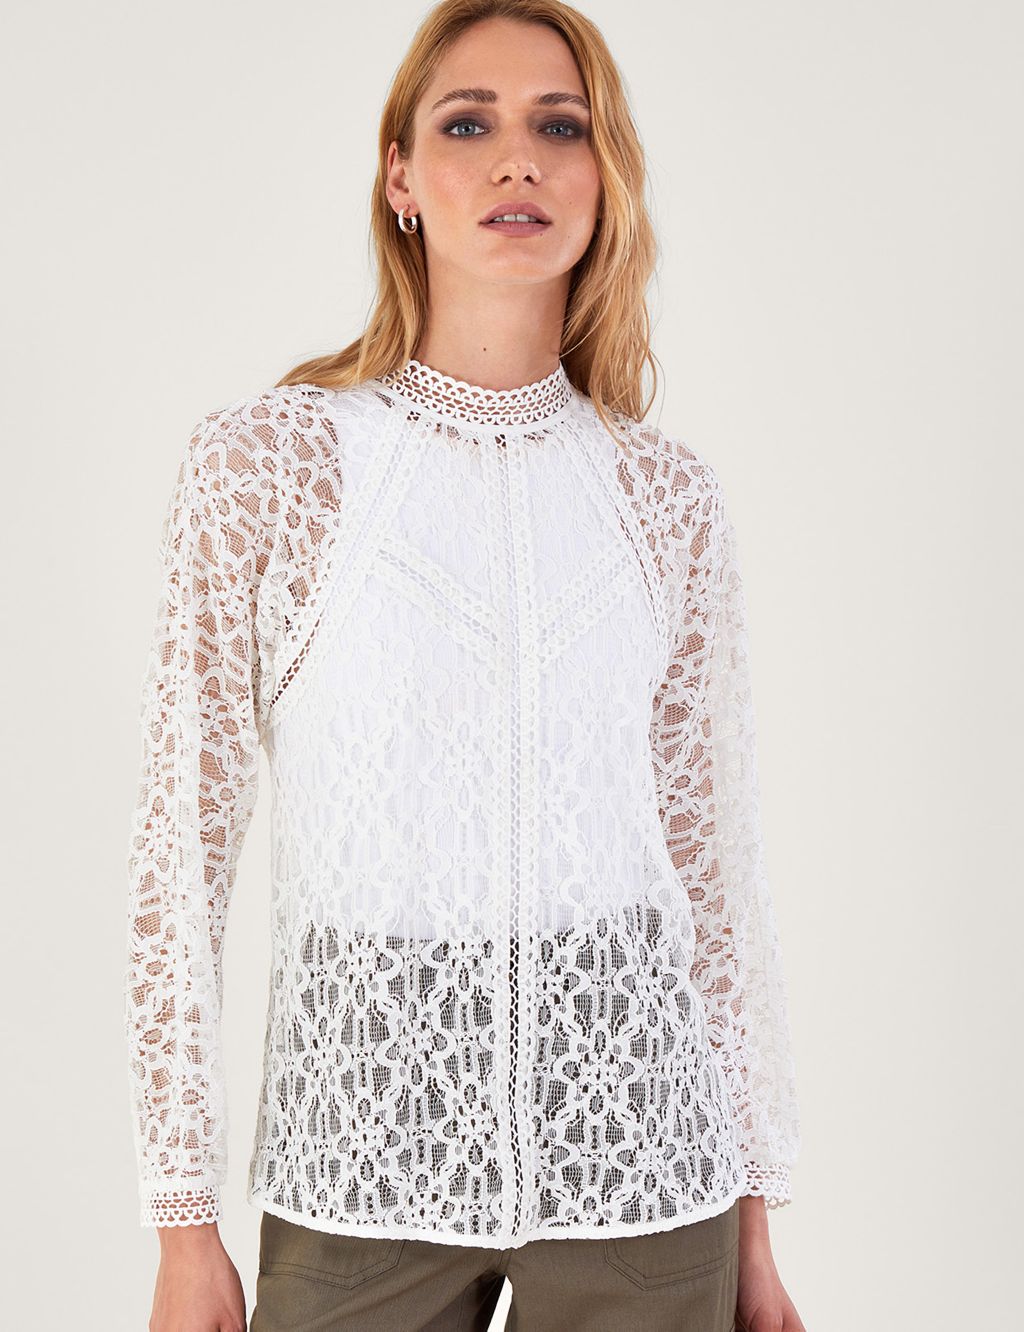 Lace High Neck Cutwork Detail Blouse image 1